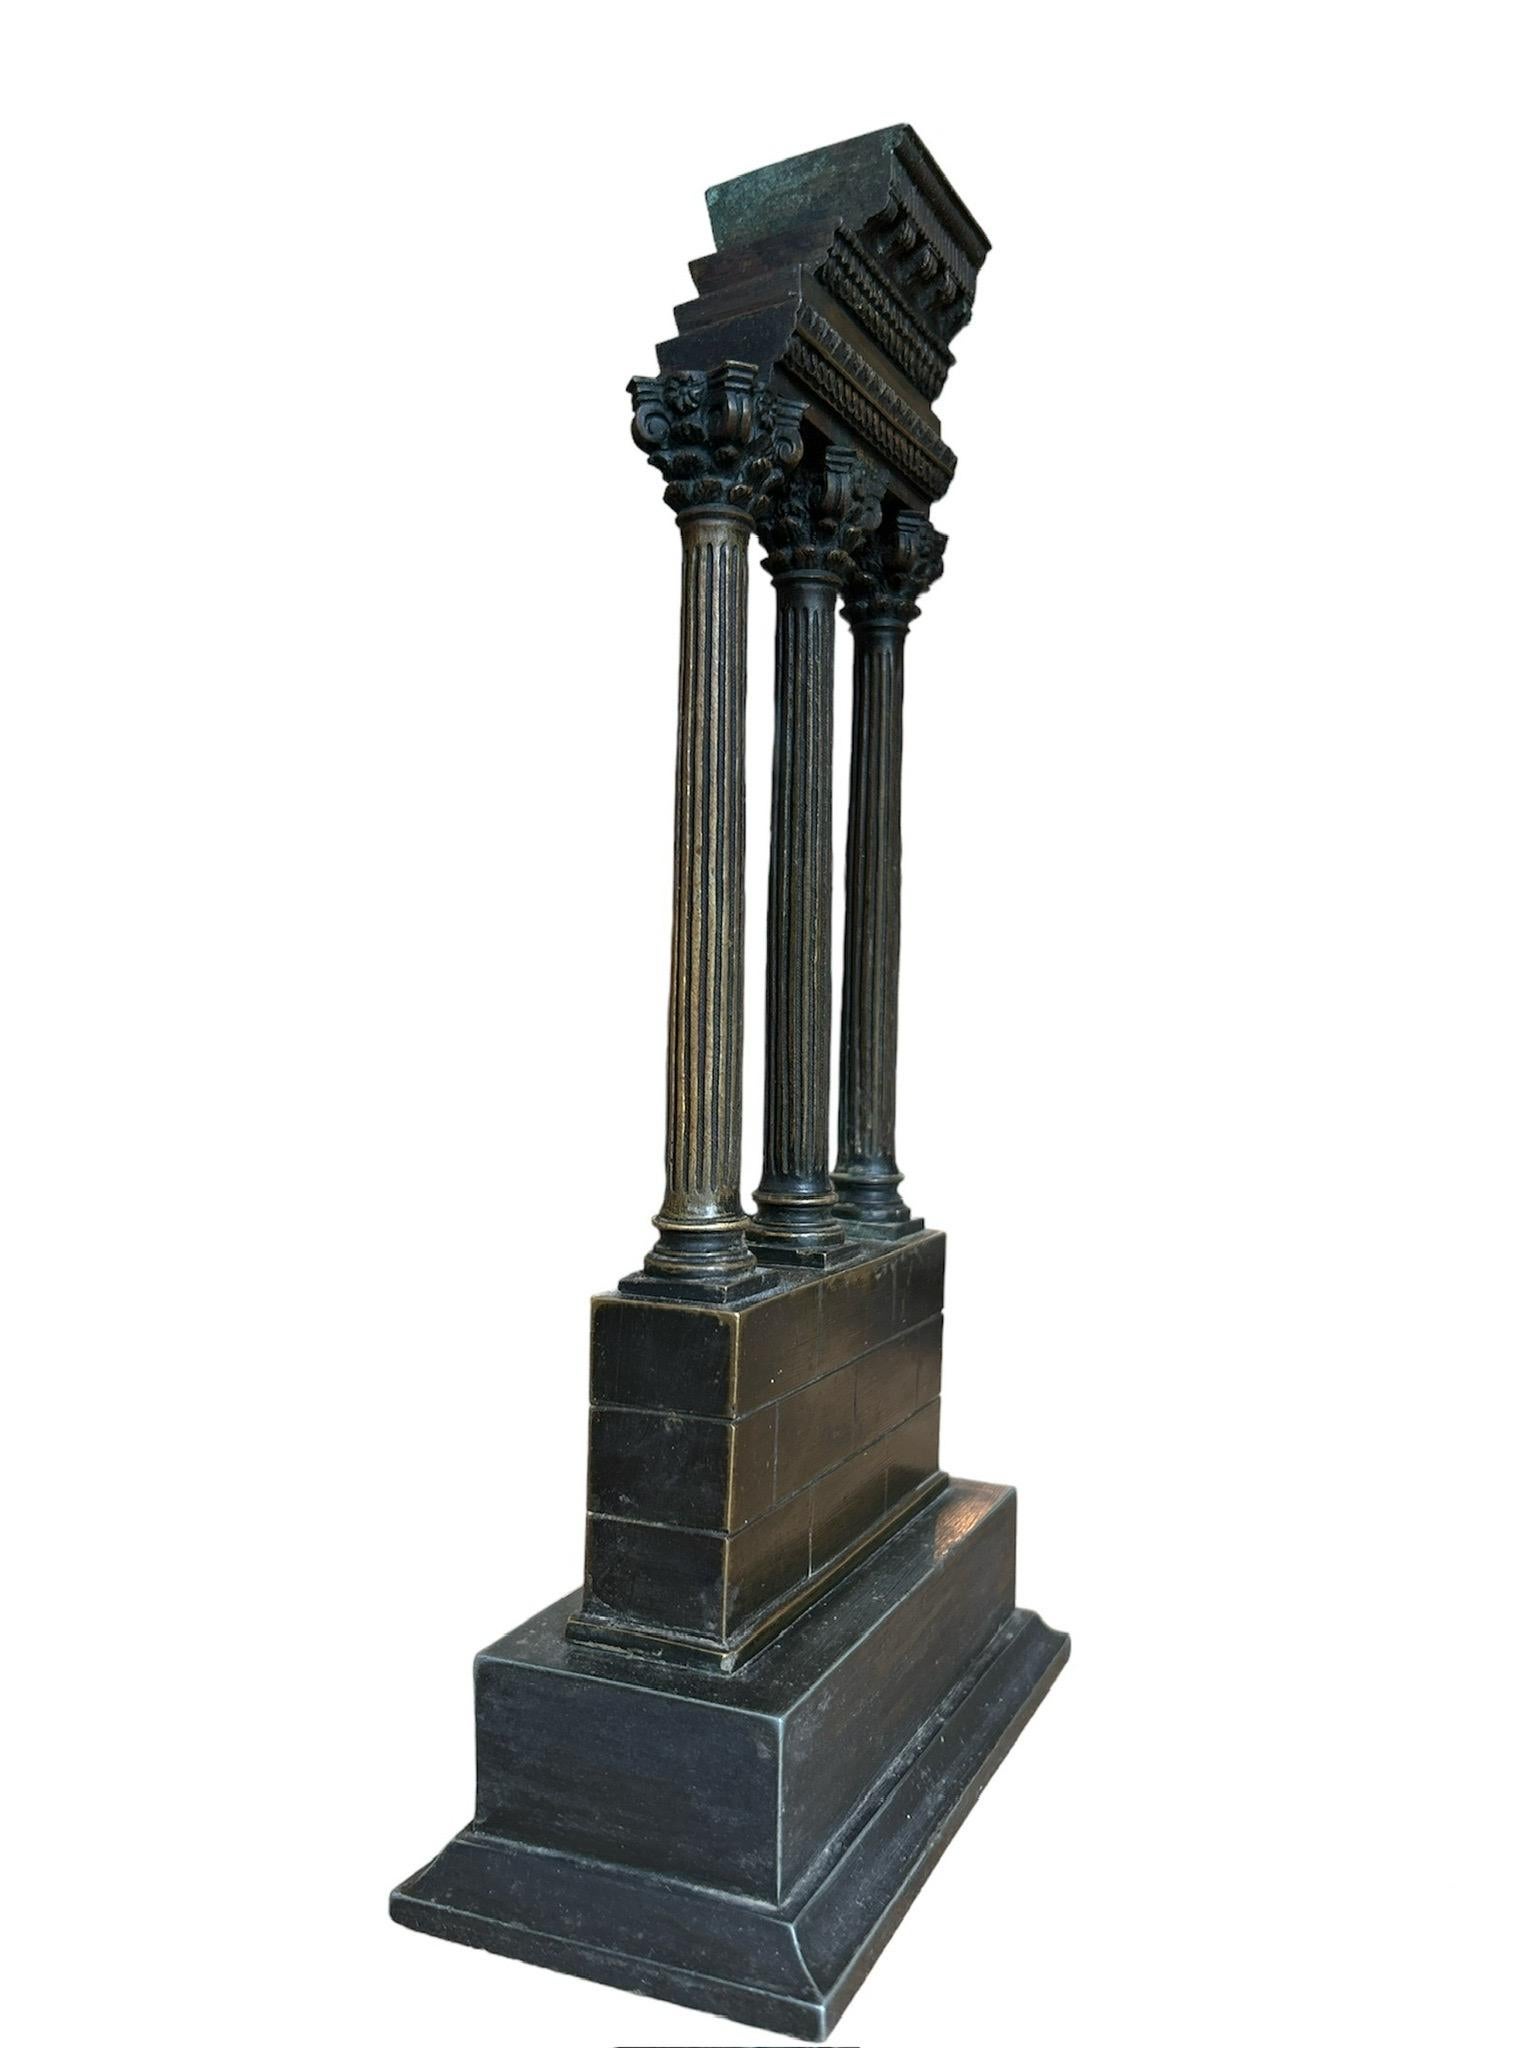 Temple of Castor & Pollux in bronze with a green patina.
The base is in iron. Grand Tour souvenir.